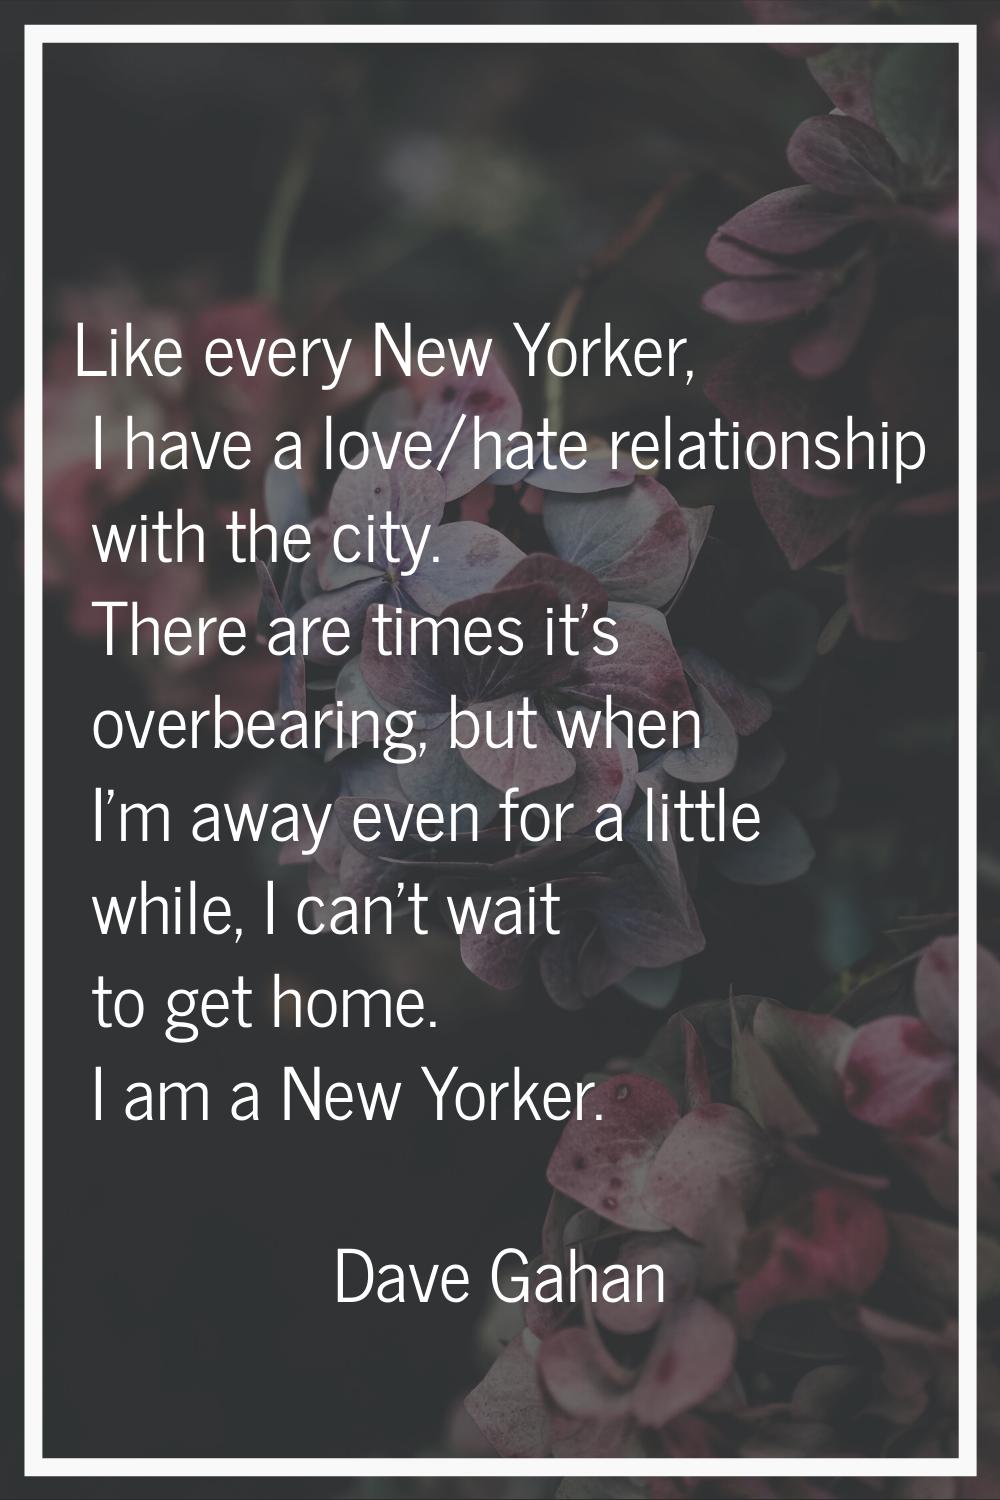 Like every New Yorker, I have a love/hate relationship with the city. There are times it's overbear